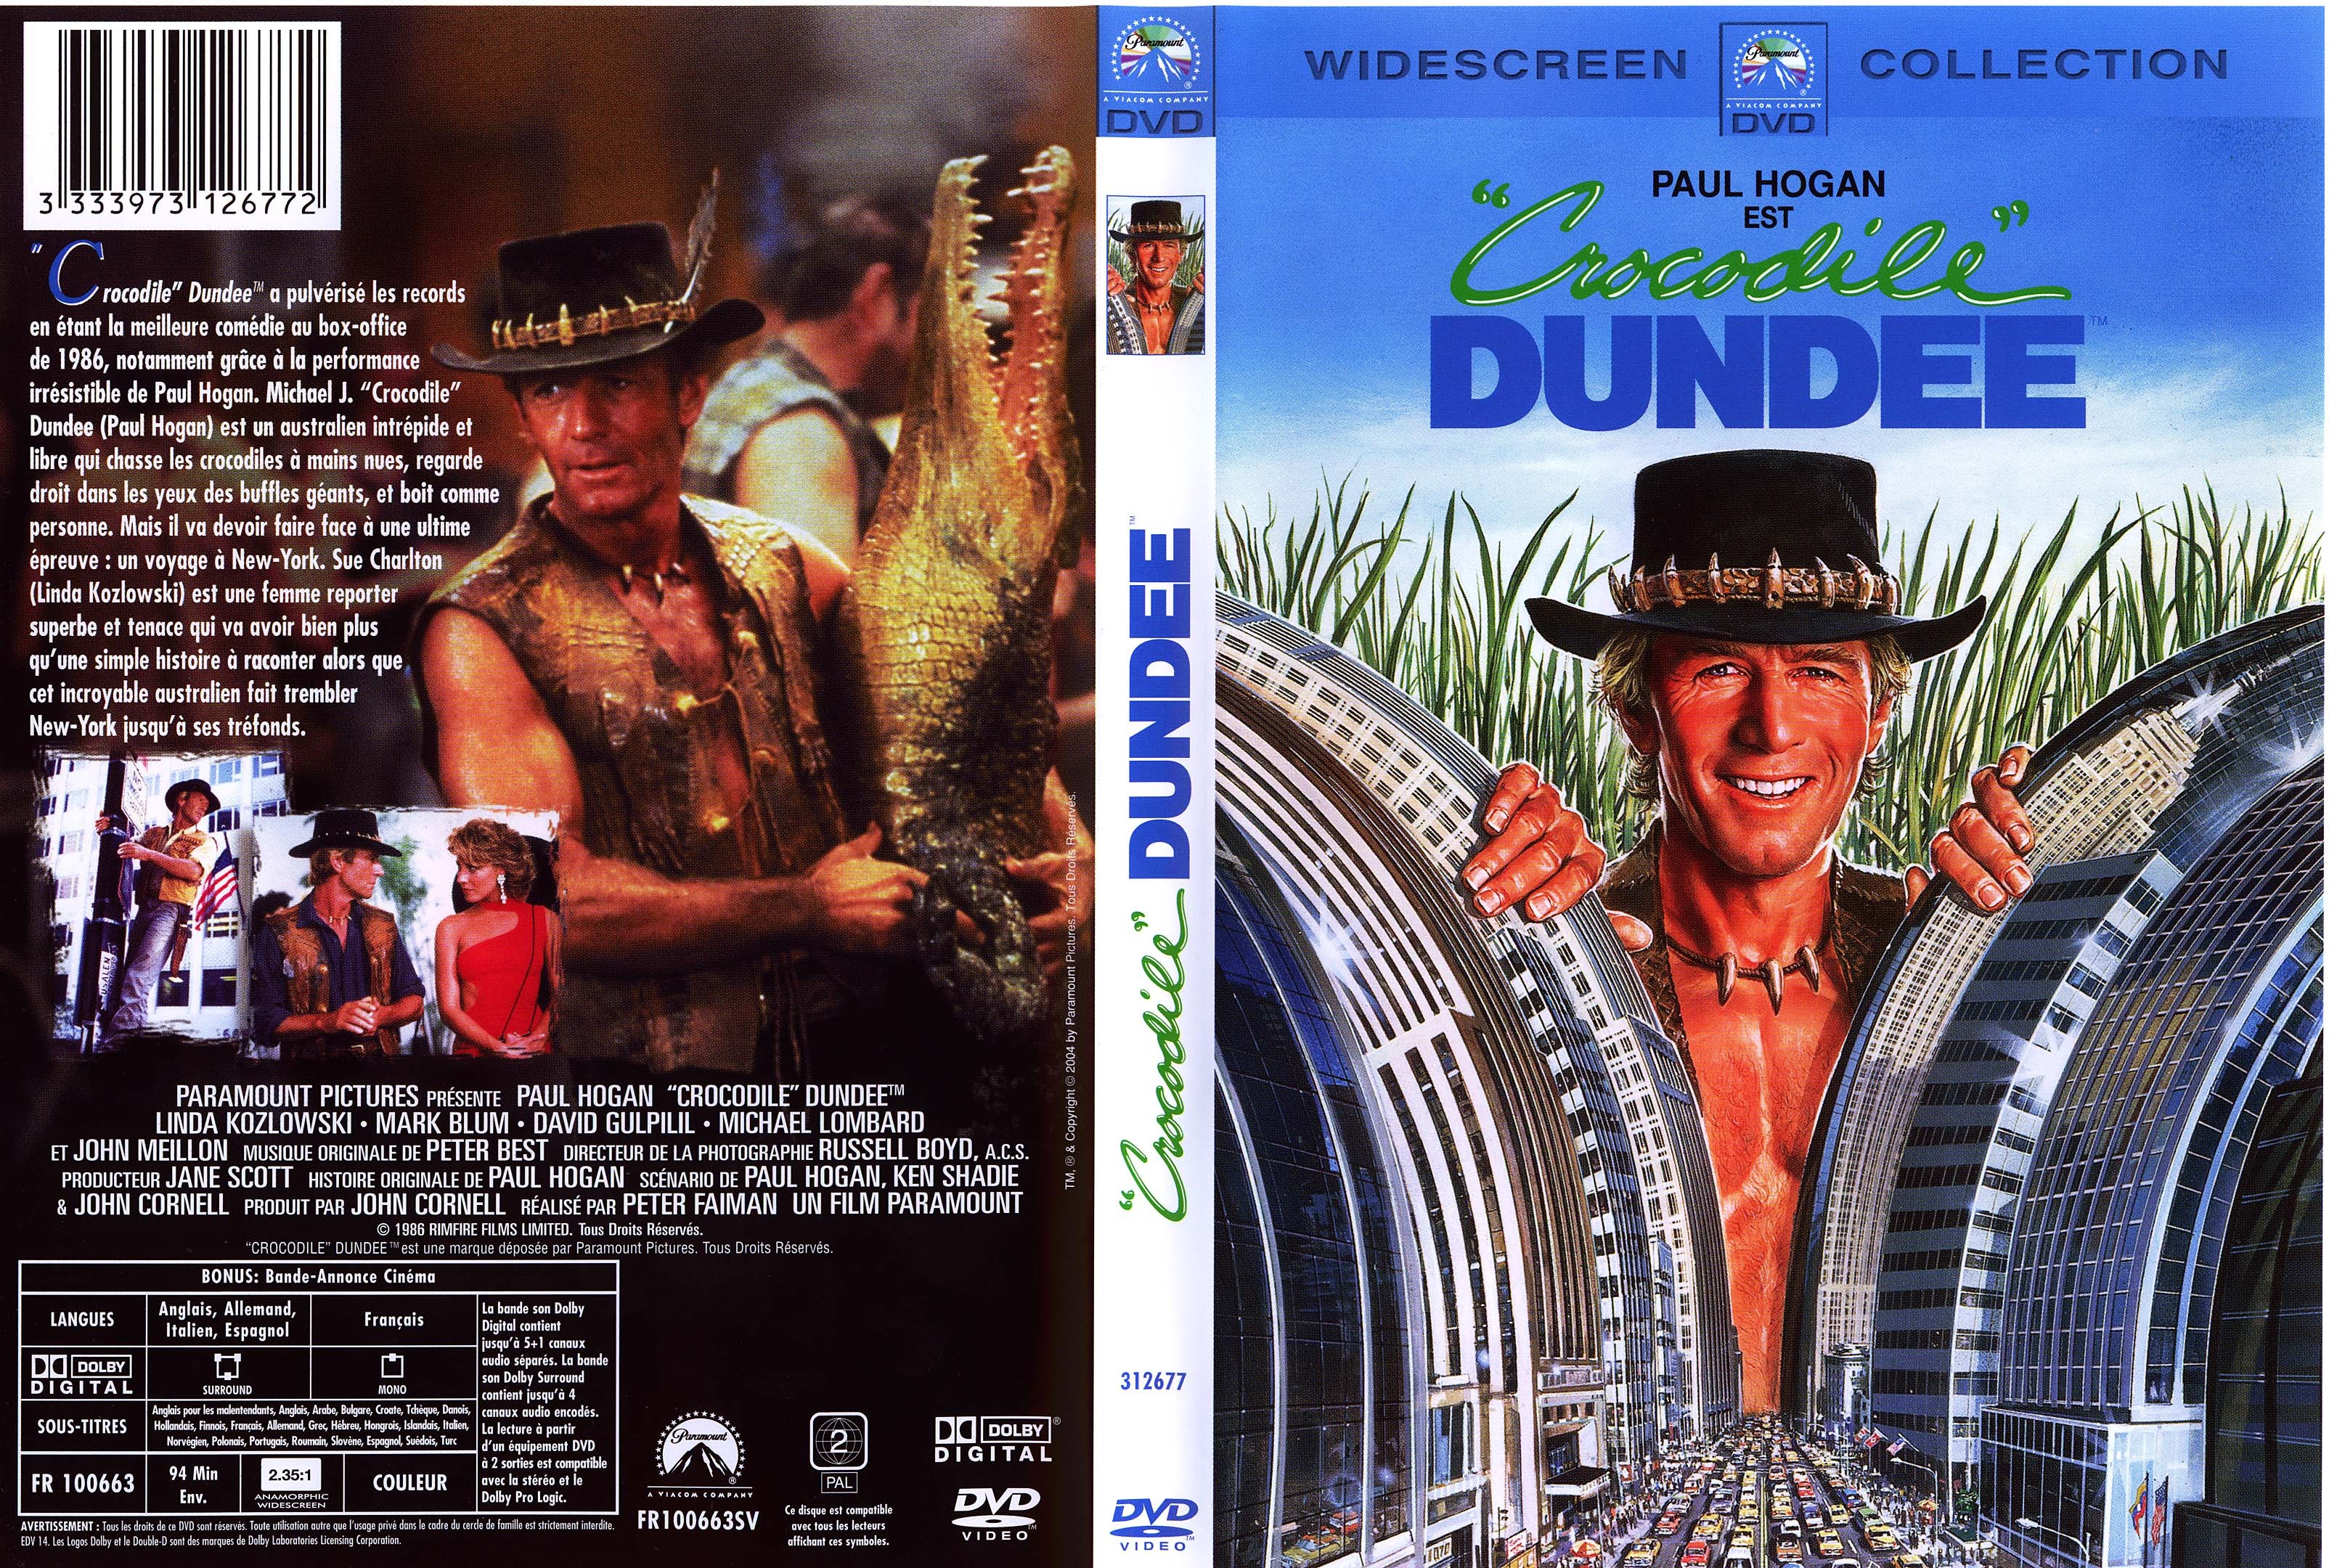 Jaquette DVD Crocodile Dundee